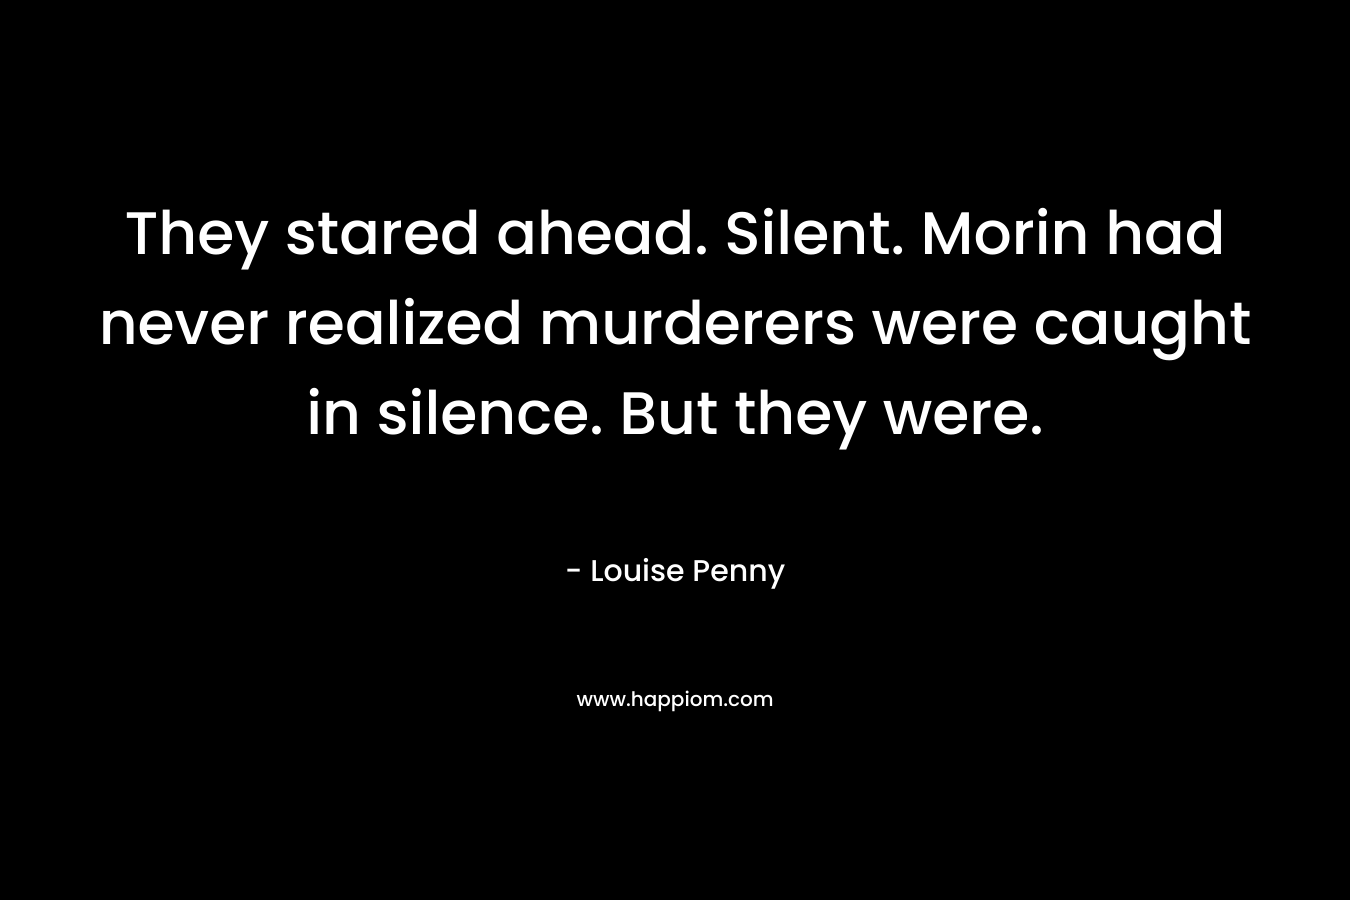 They stared ahead. Silent. Morin had never realized murderers were caught in silence. But they were. – Louise Penny